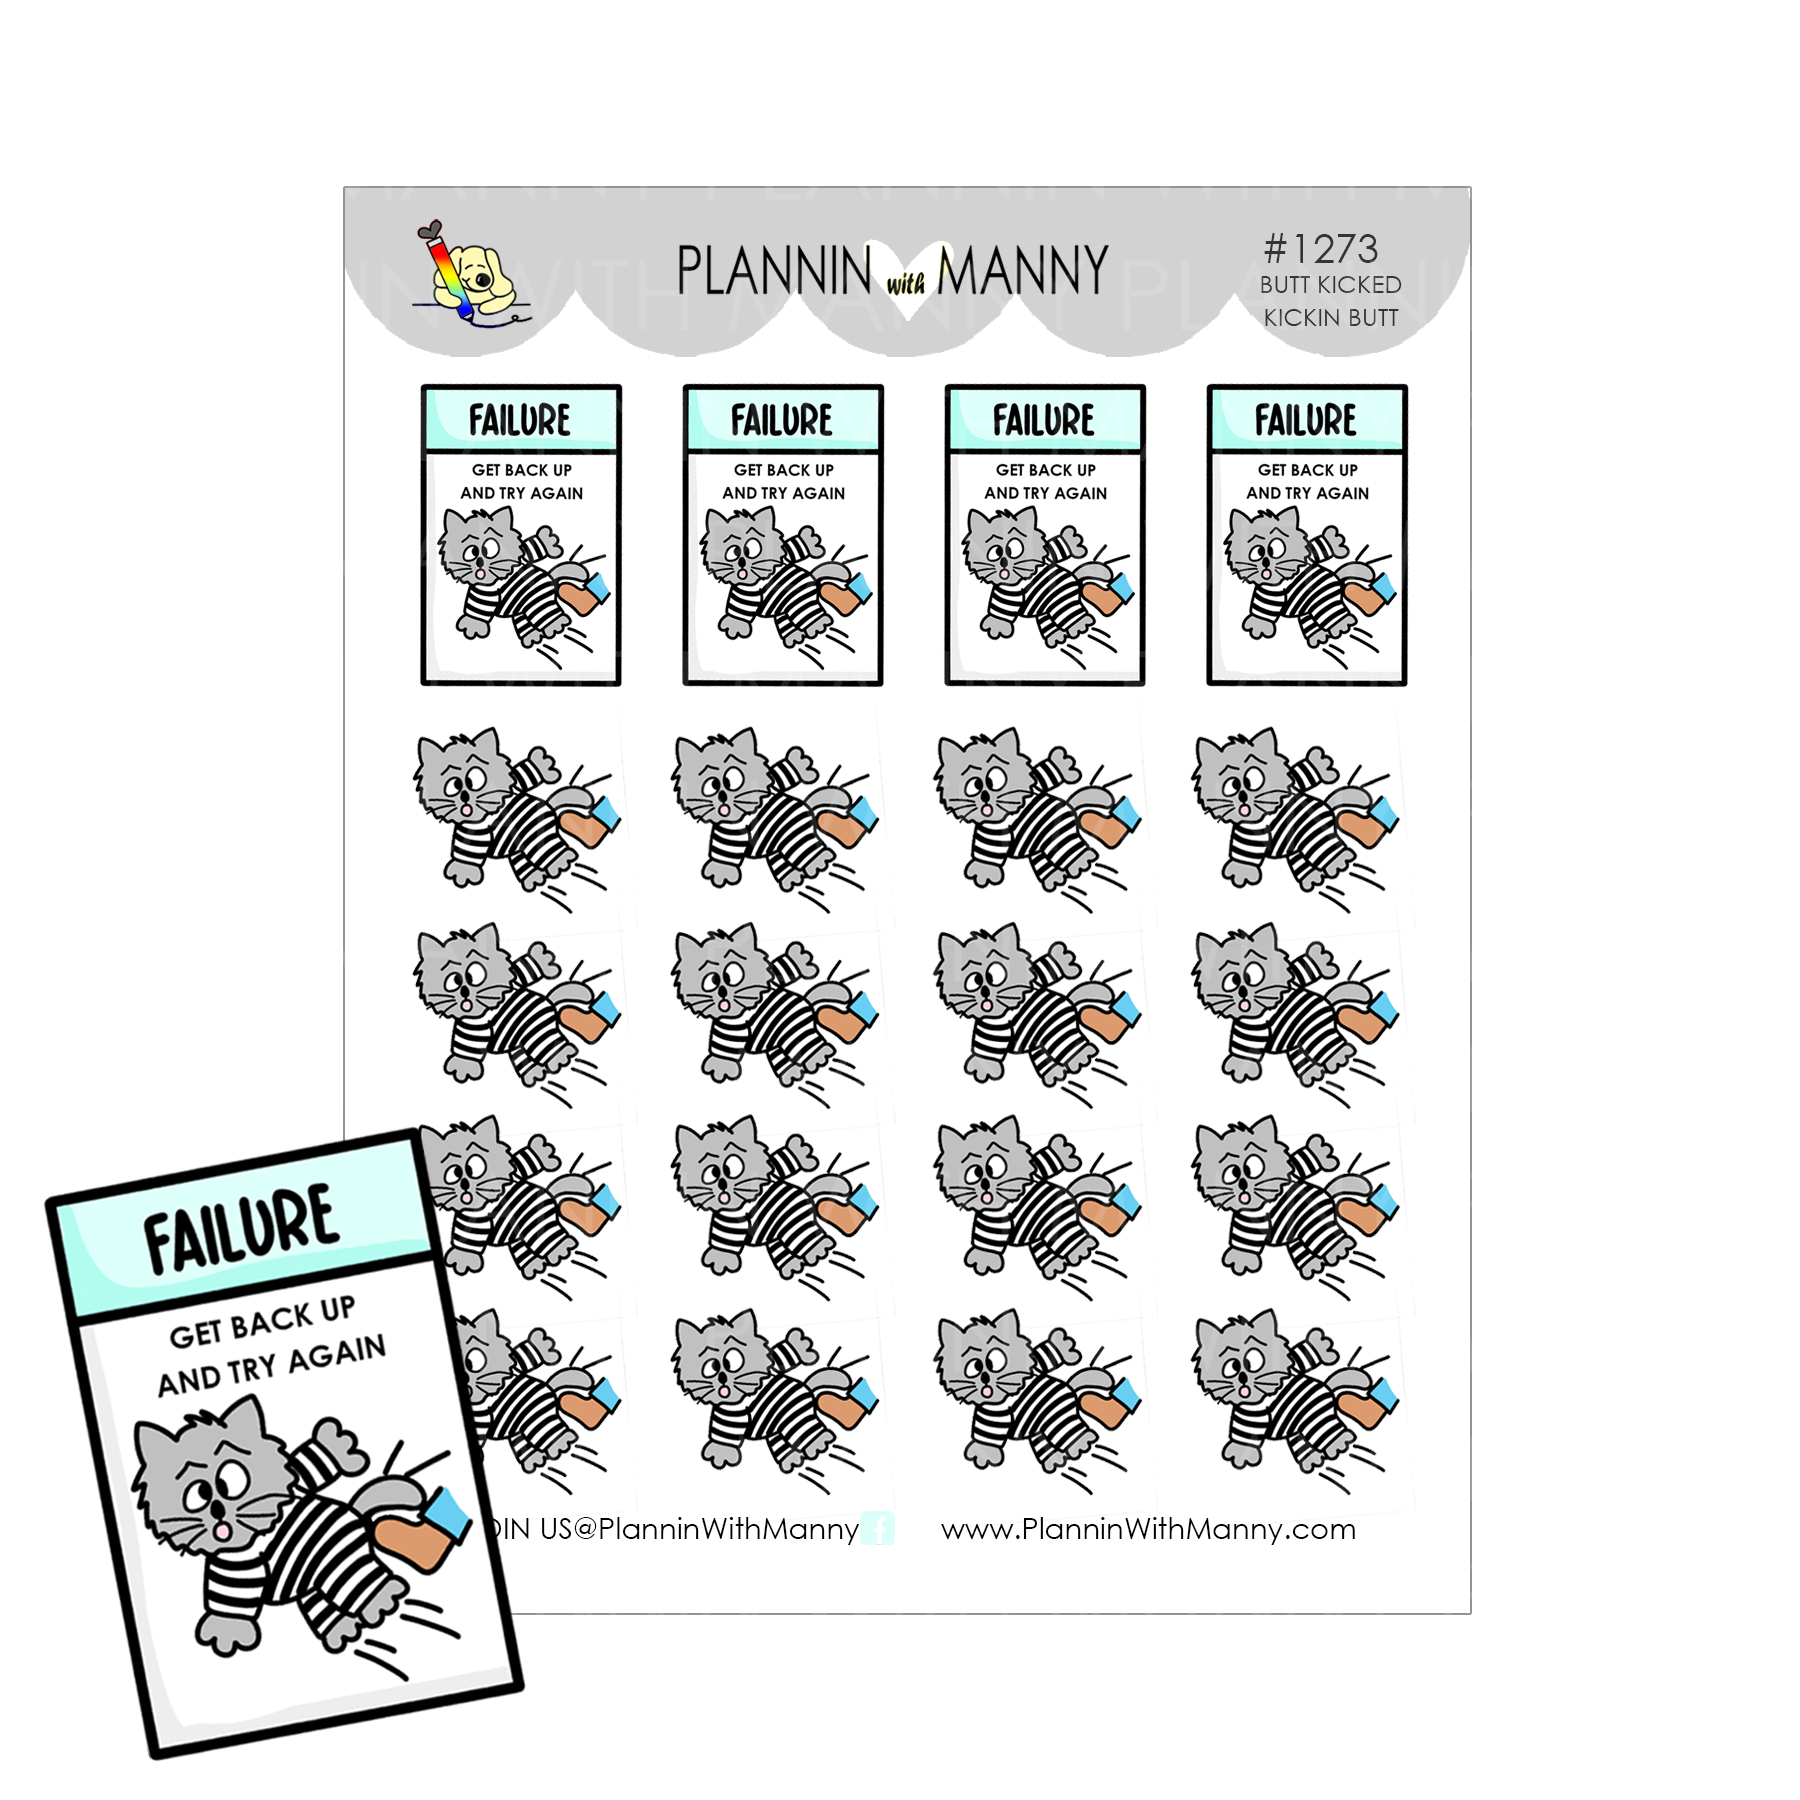 1273 Butt Kicked or Butt Kicked Planner Stickers - Mannyopoly Collection